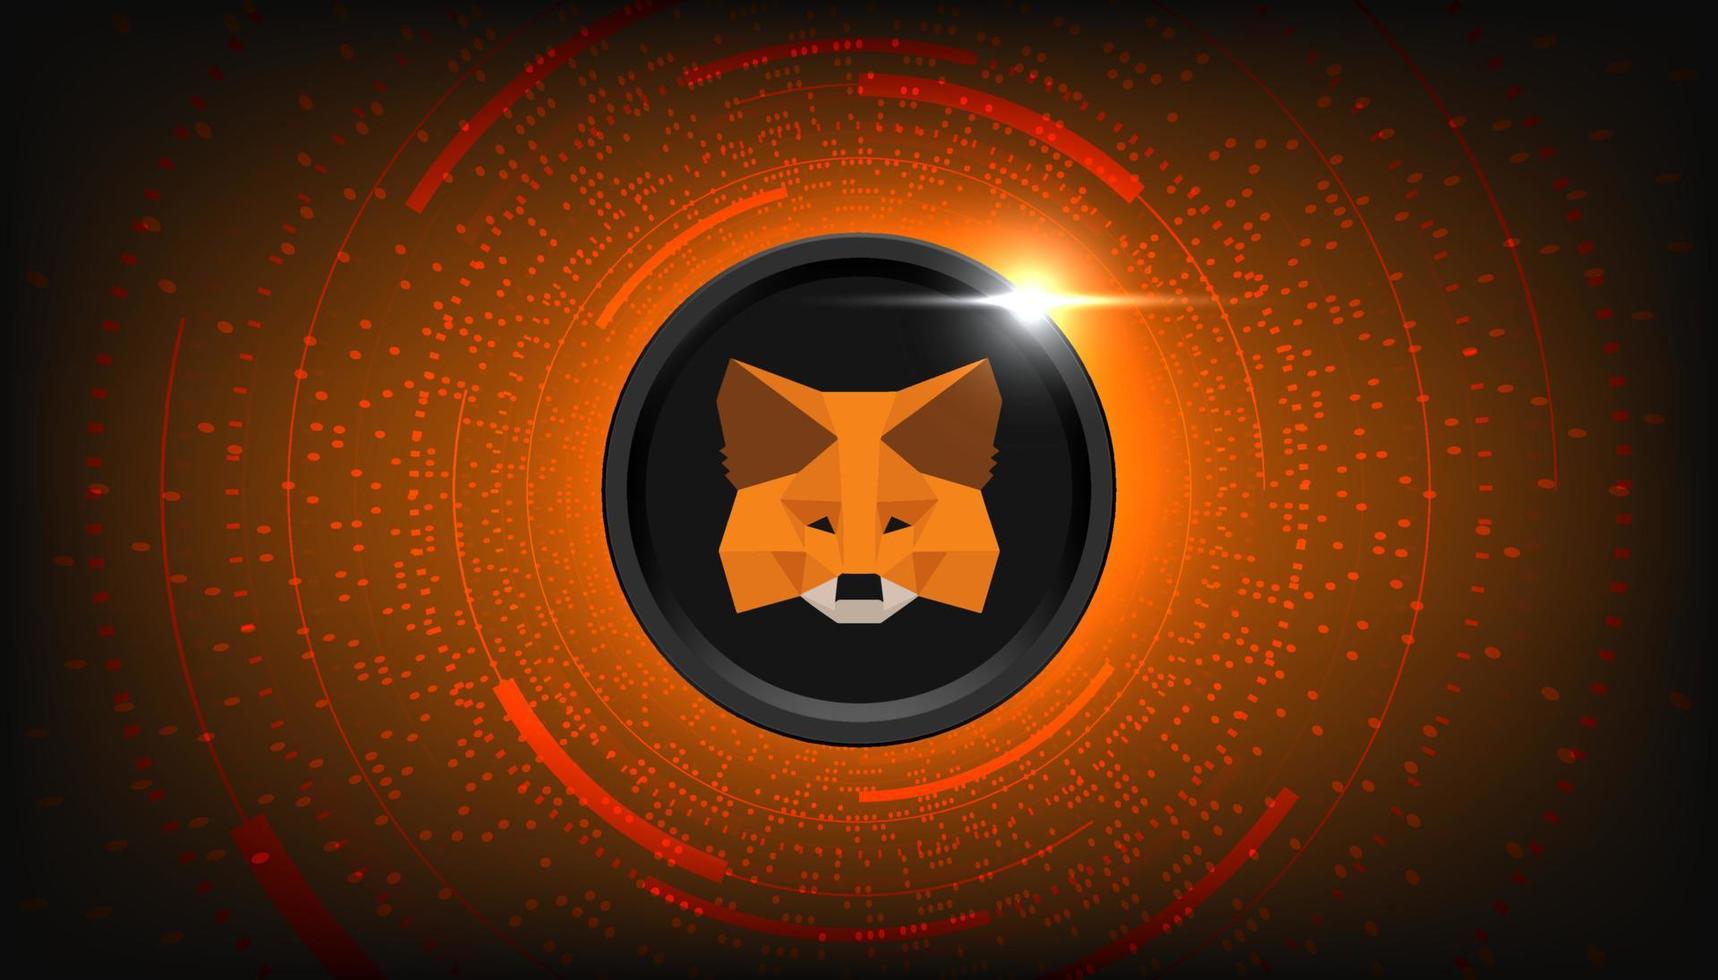 MetaMask Exploring Bitcoin Integration: Company Urges Users to ‘Stay Tuned’